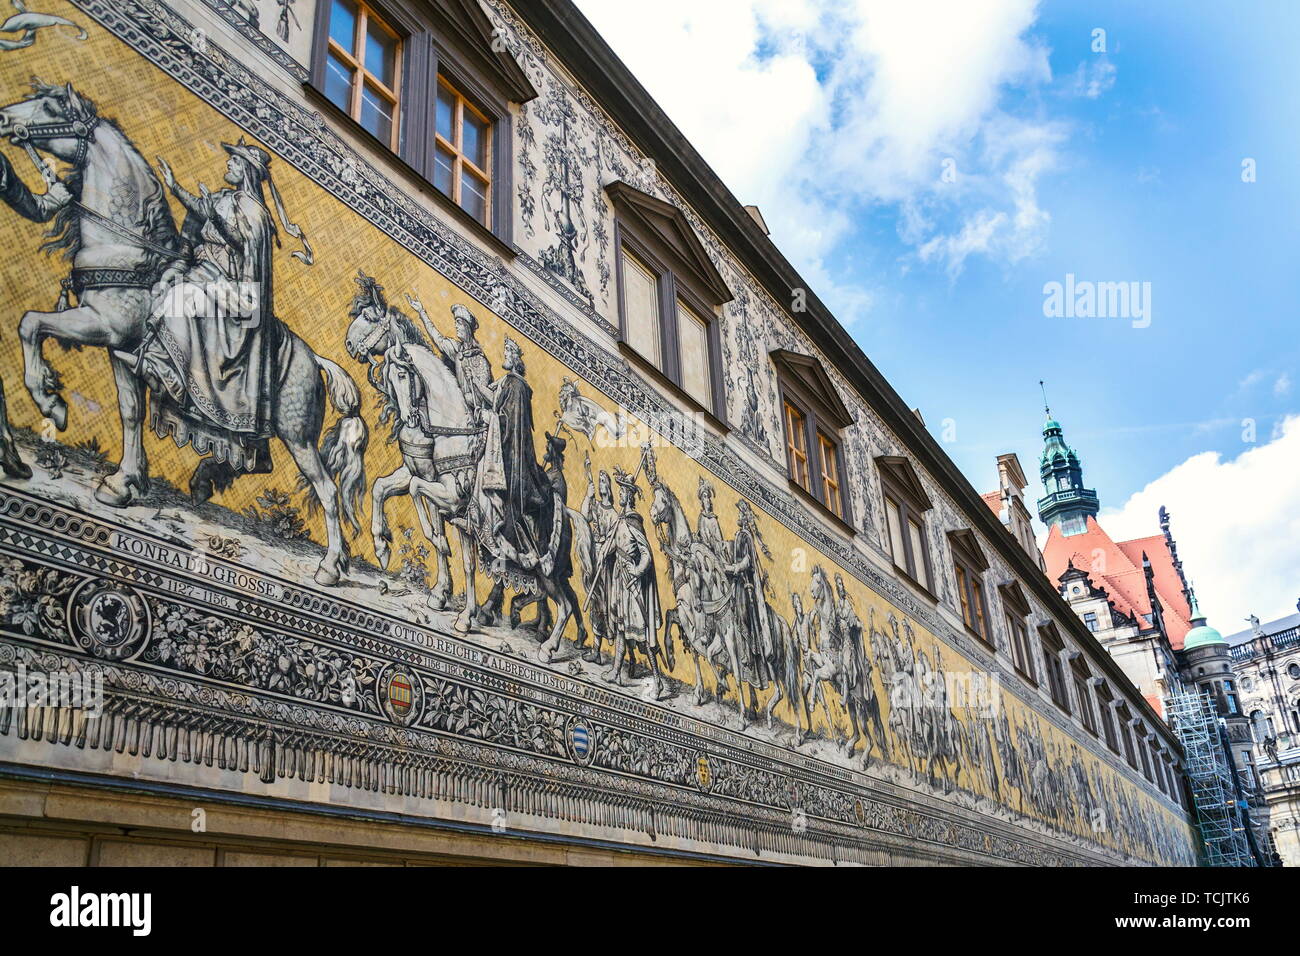 Public street view of the largest porcelain artwork in the world Furstenzug - Procession of Princess in Dresden, Germany Stock Photo